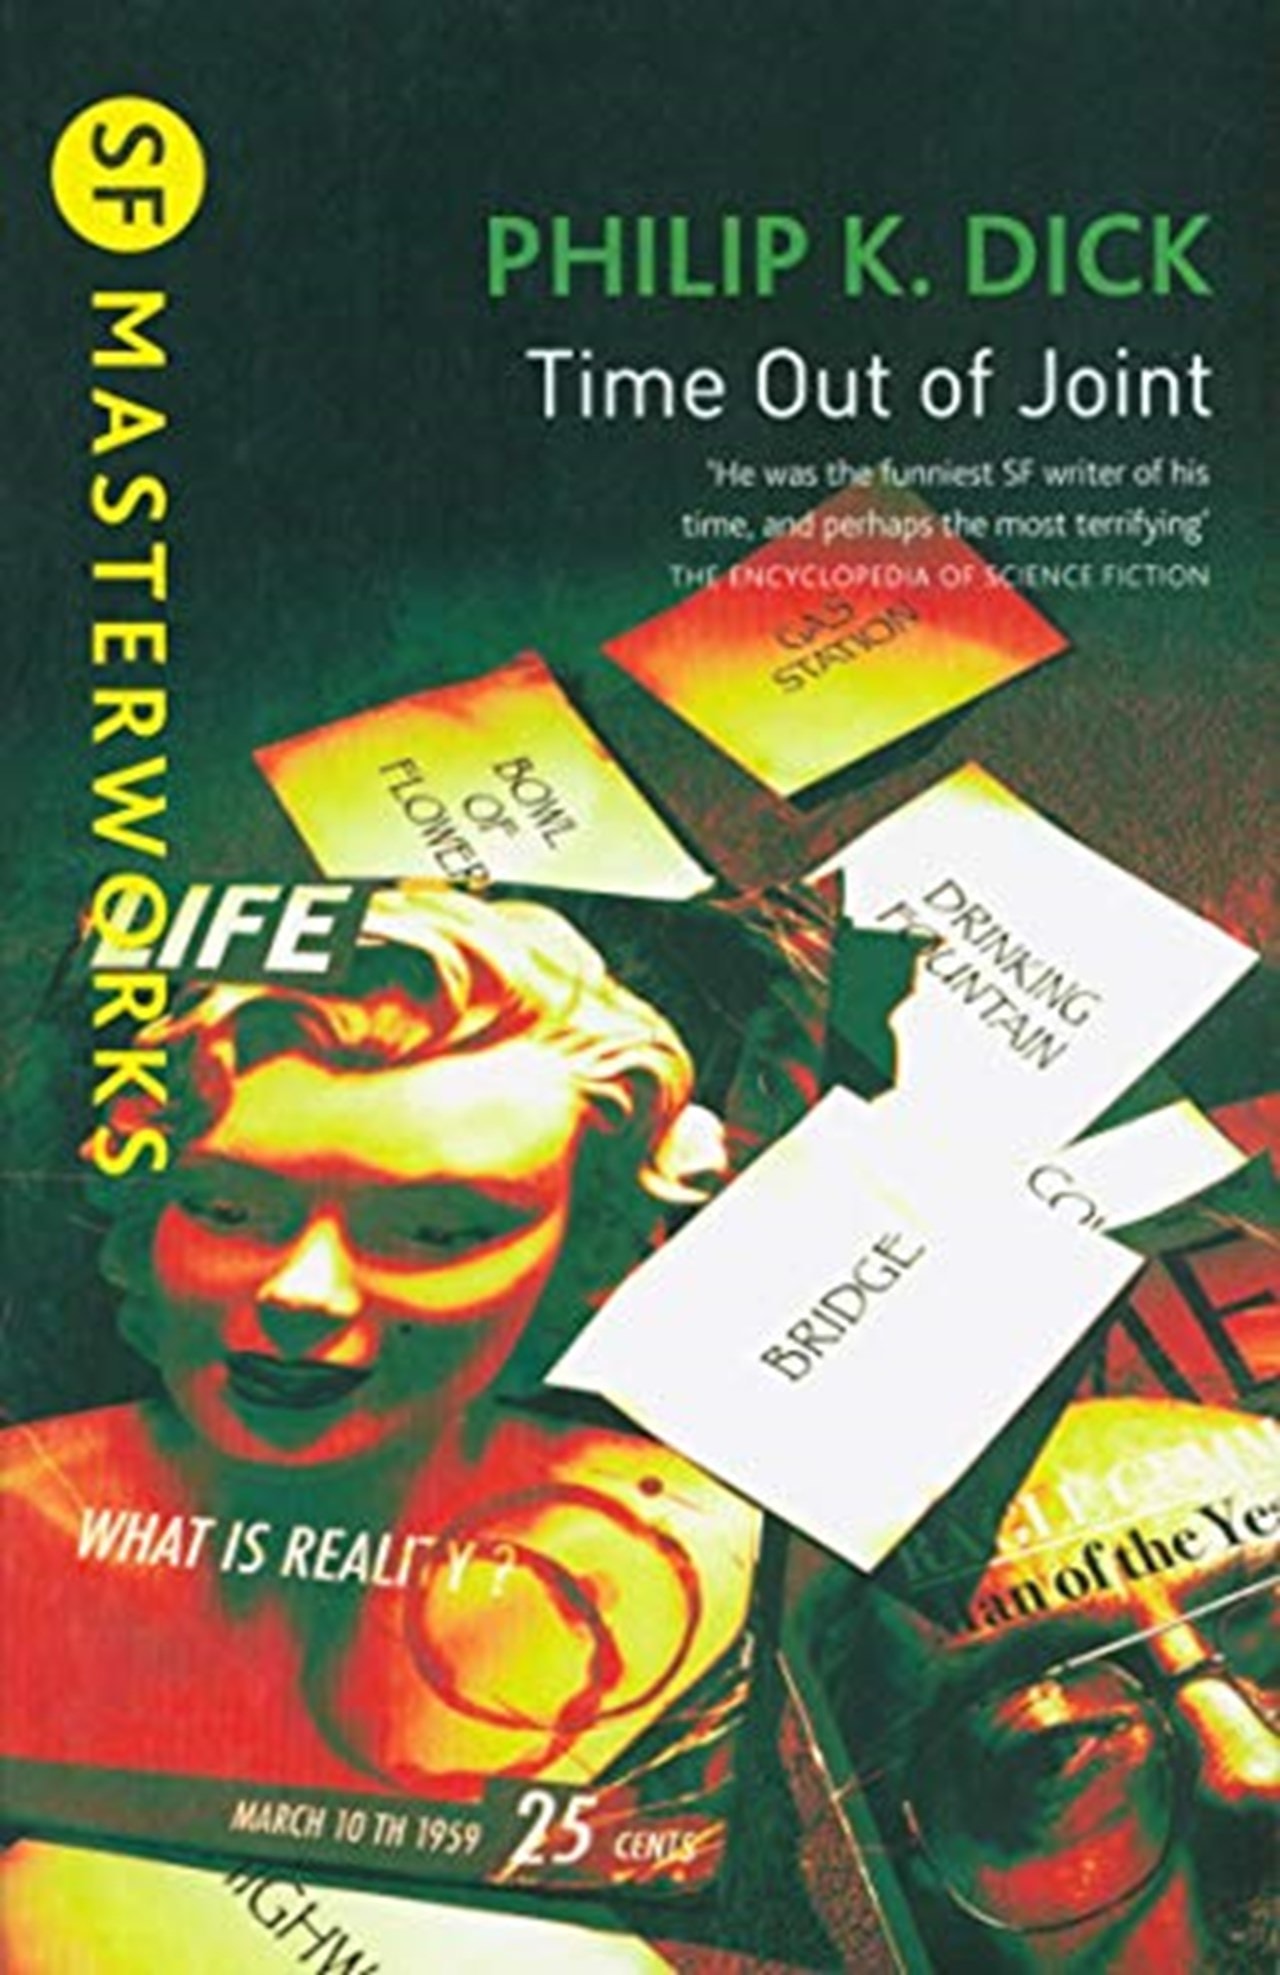 time out of joint truman show